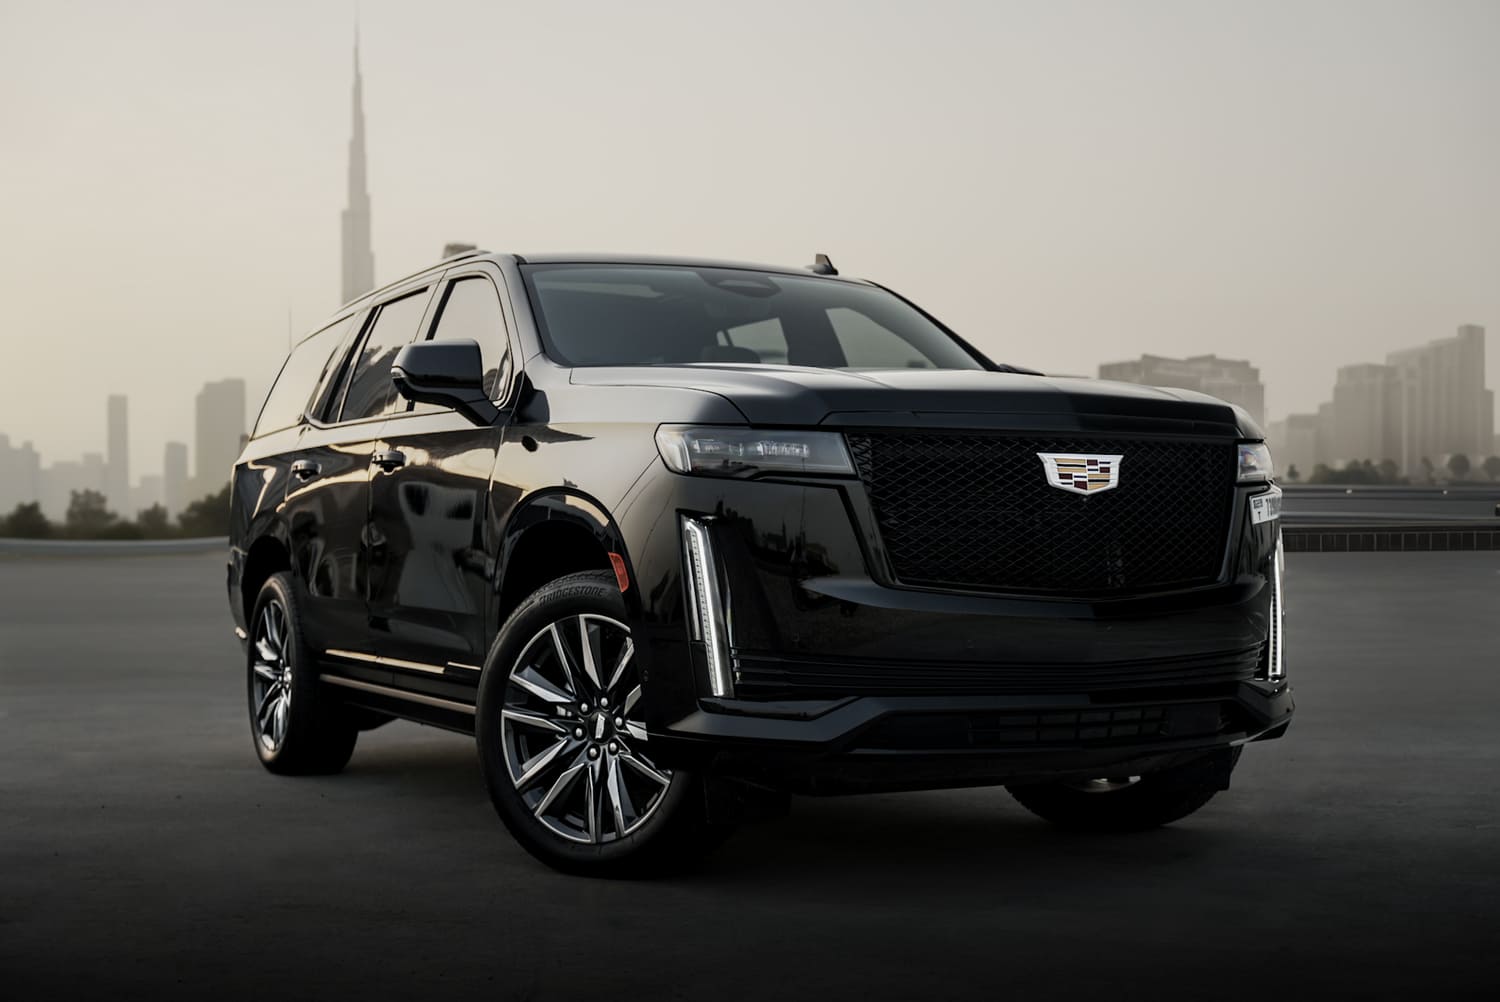 Cadillac Escalade - One and Only Cars Rental